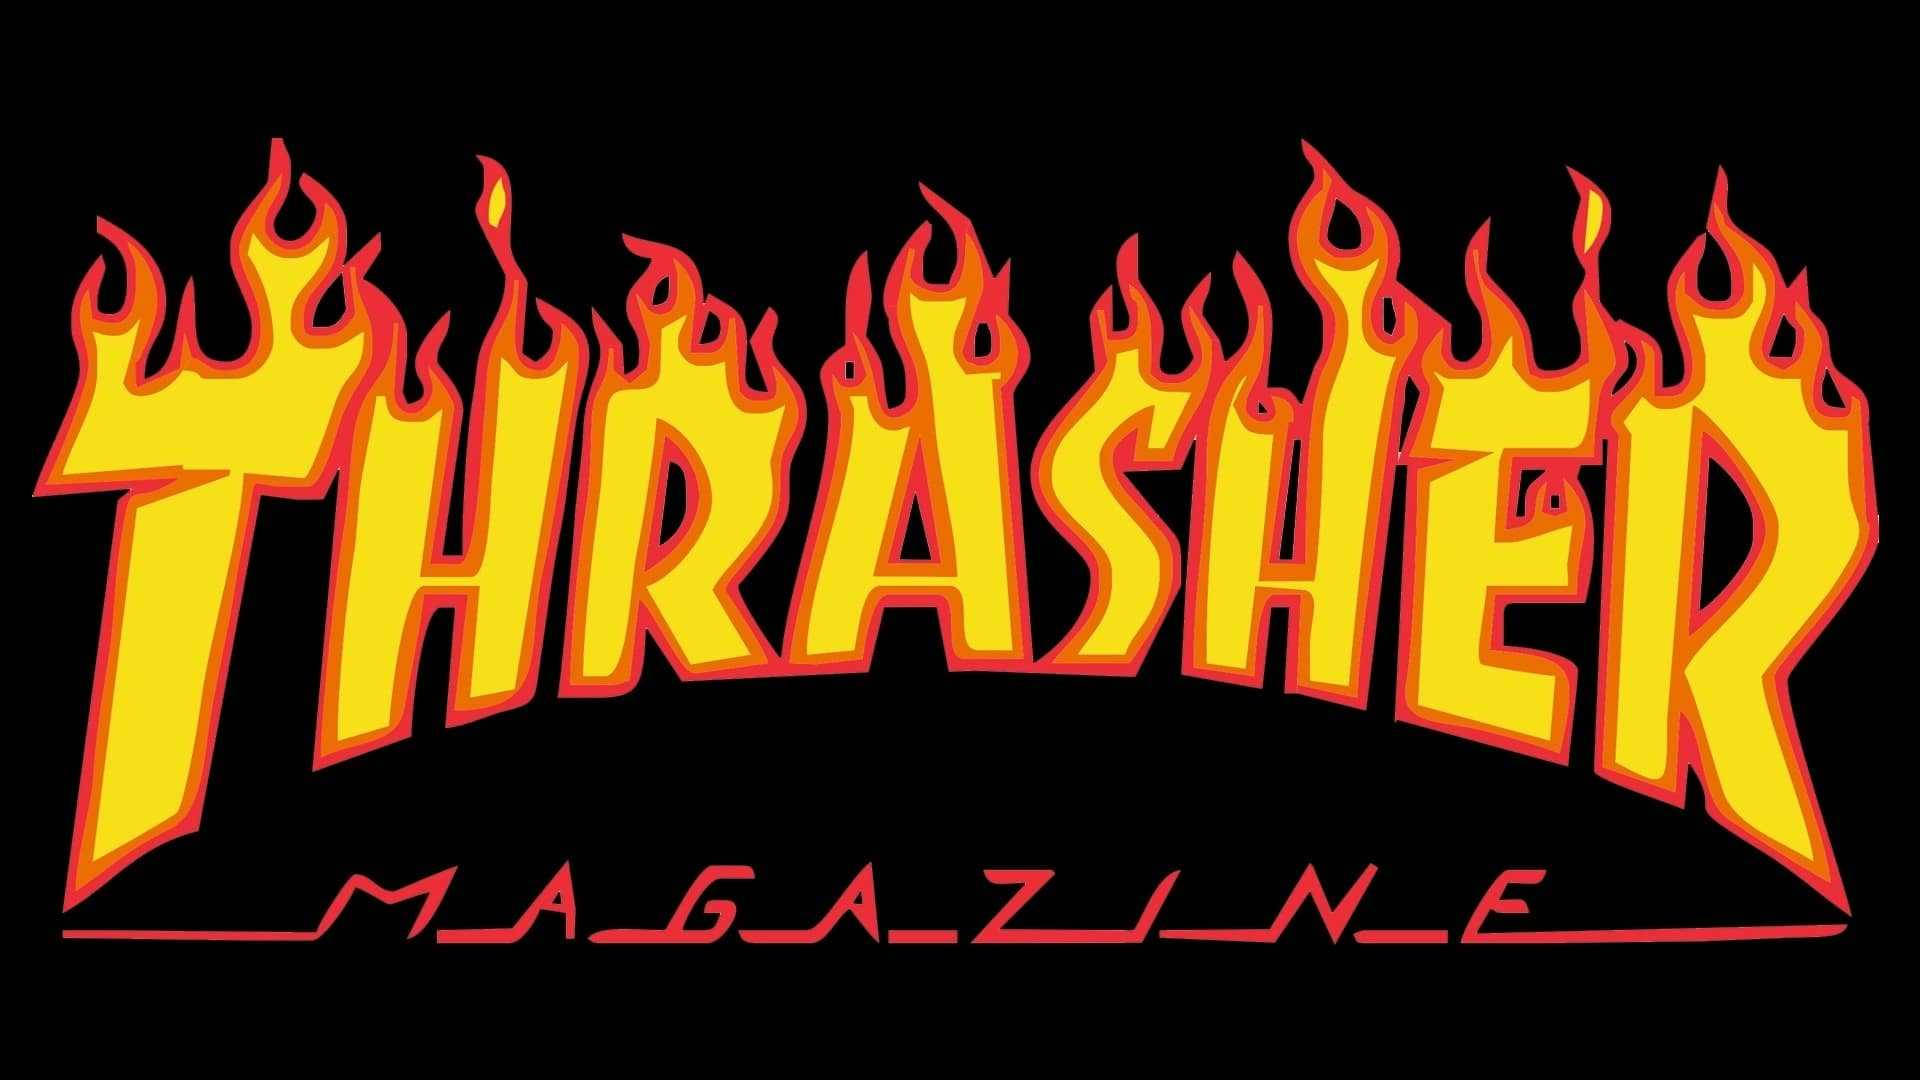 46 Thrasher Wallpapers & Backgrounds For FREE | Wallpapers.com